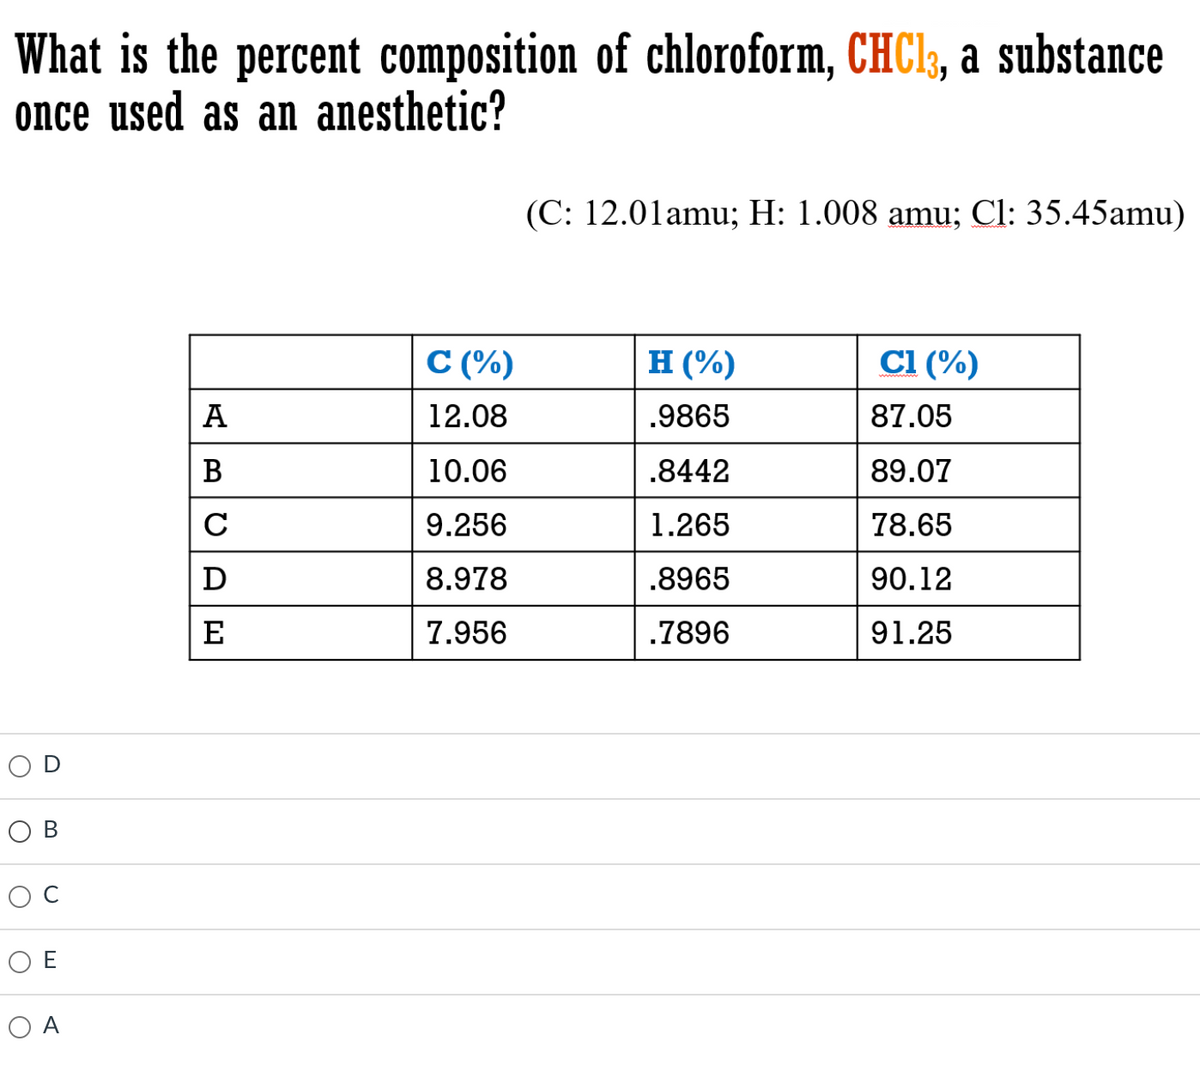 What is the percent composition of chloroform, CHC13, a substance
once used as an anesthetic?
(C: 12.01amu; H: 1.008 amu; Cl: 35.45amu)
C (%)
н (%)
C1 (%)
А
12.08
.9865
87.05
В
10.06
.8442
89.07
C
9.256
1.265
78.65
D
8.978
.8965
90.12
E
7.956
.7896
91.25
В
O E
O A
